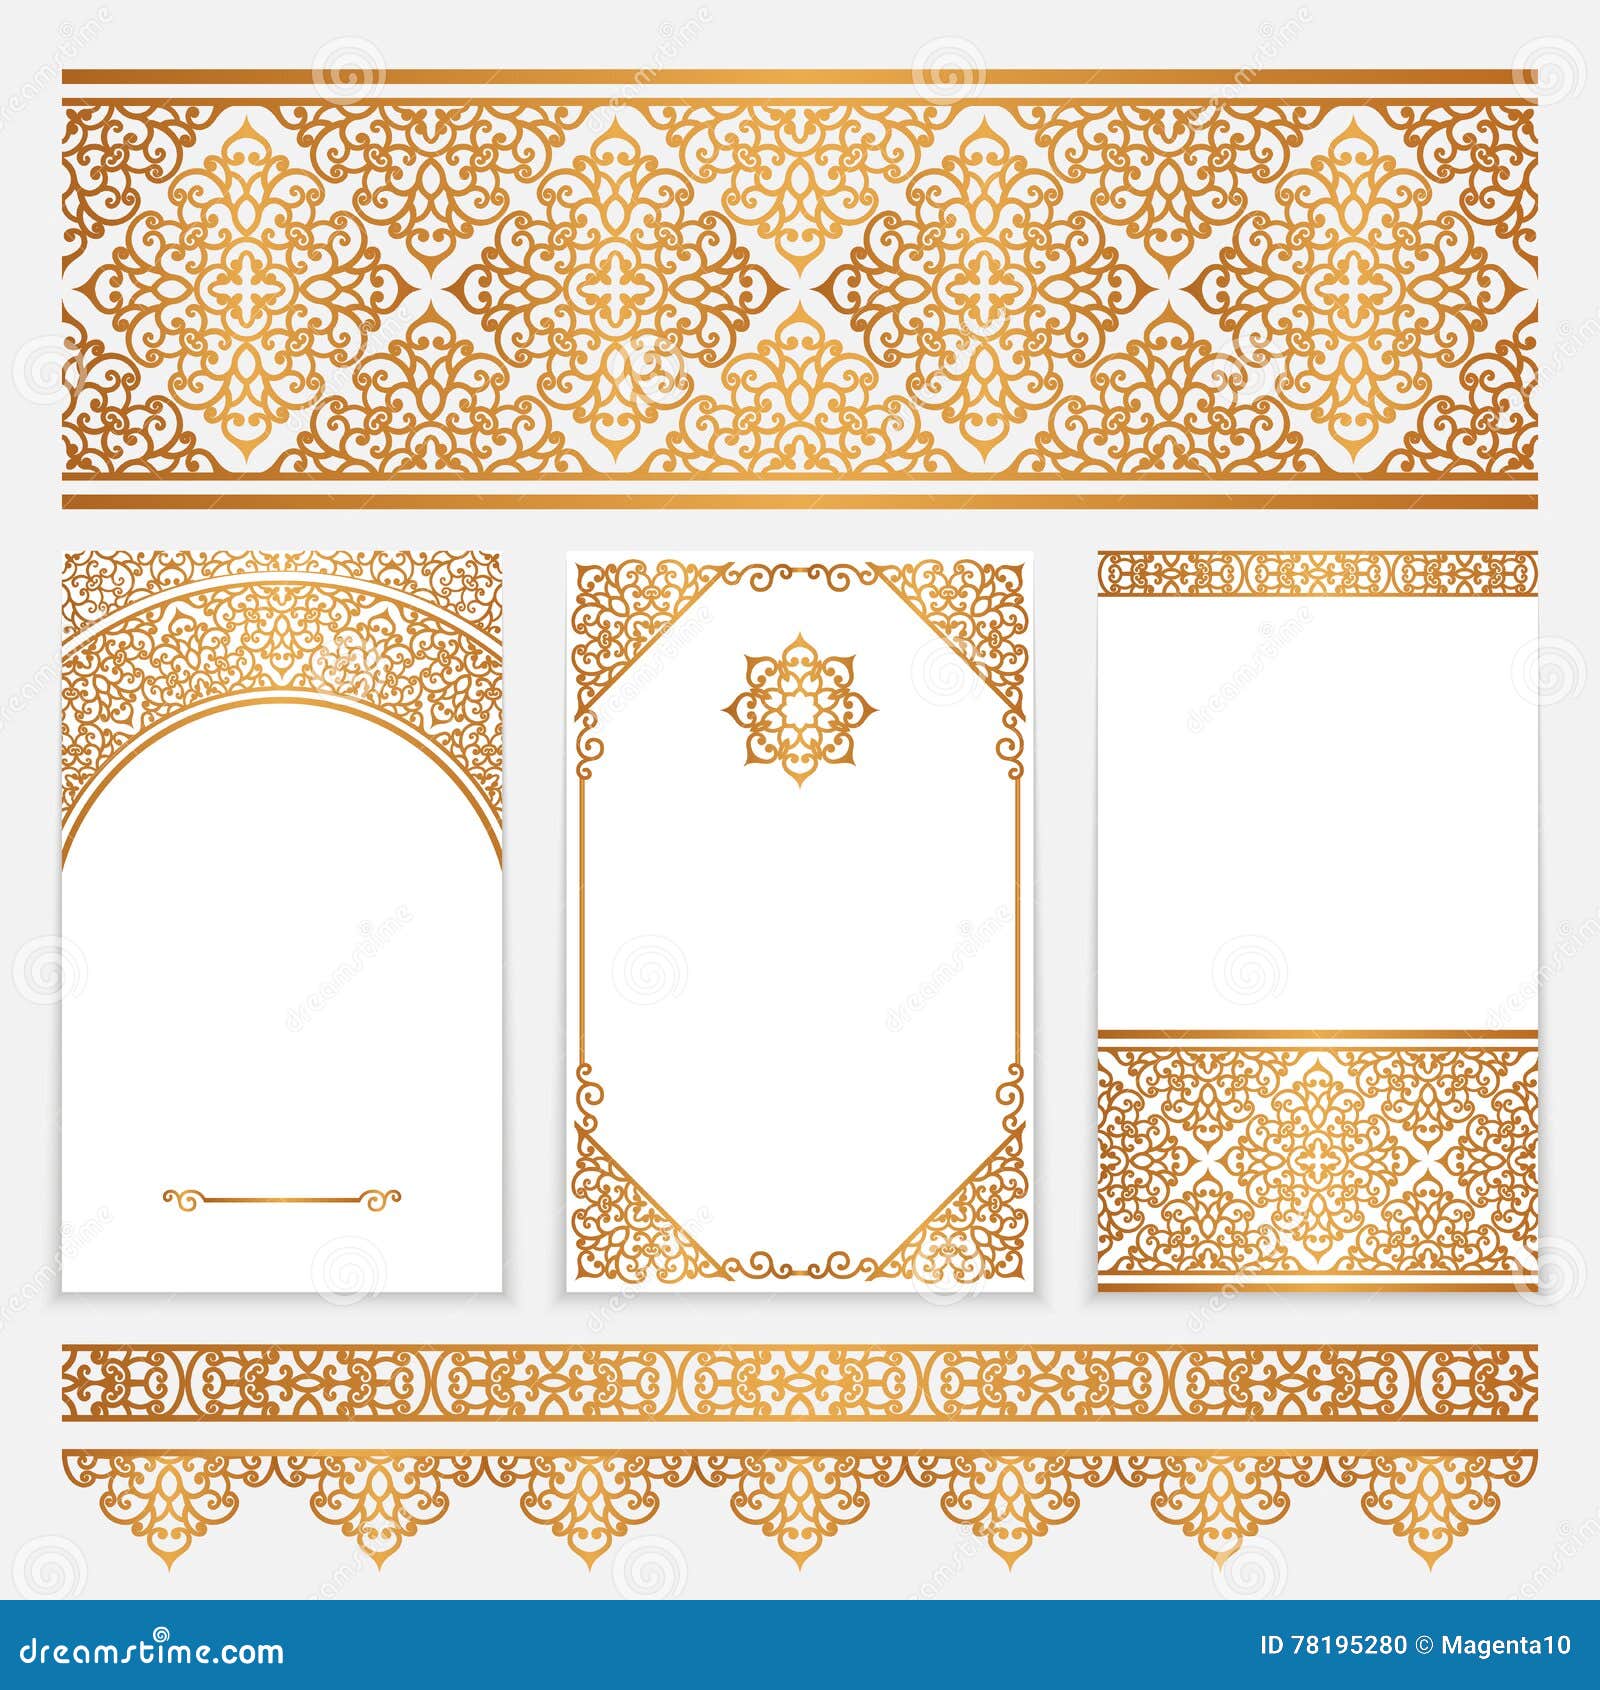 vintage gold borders and frames on white